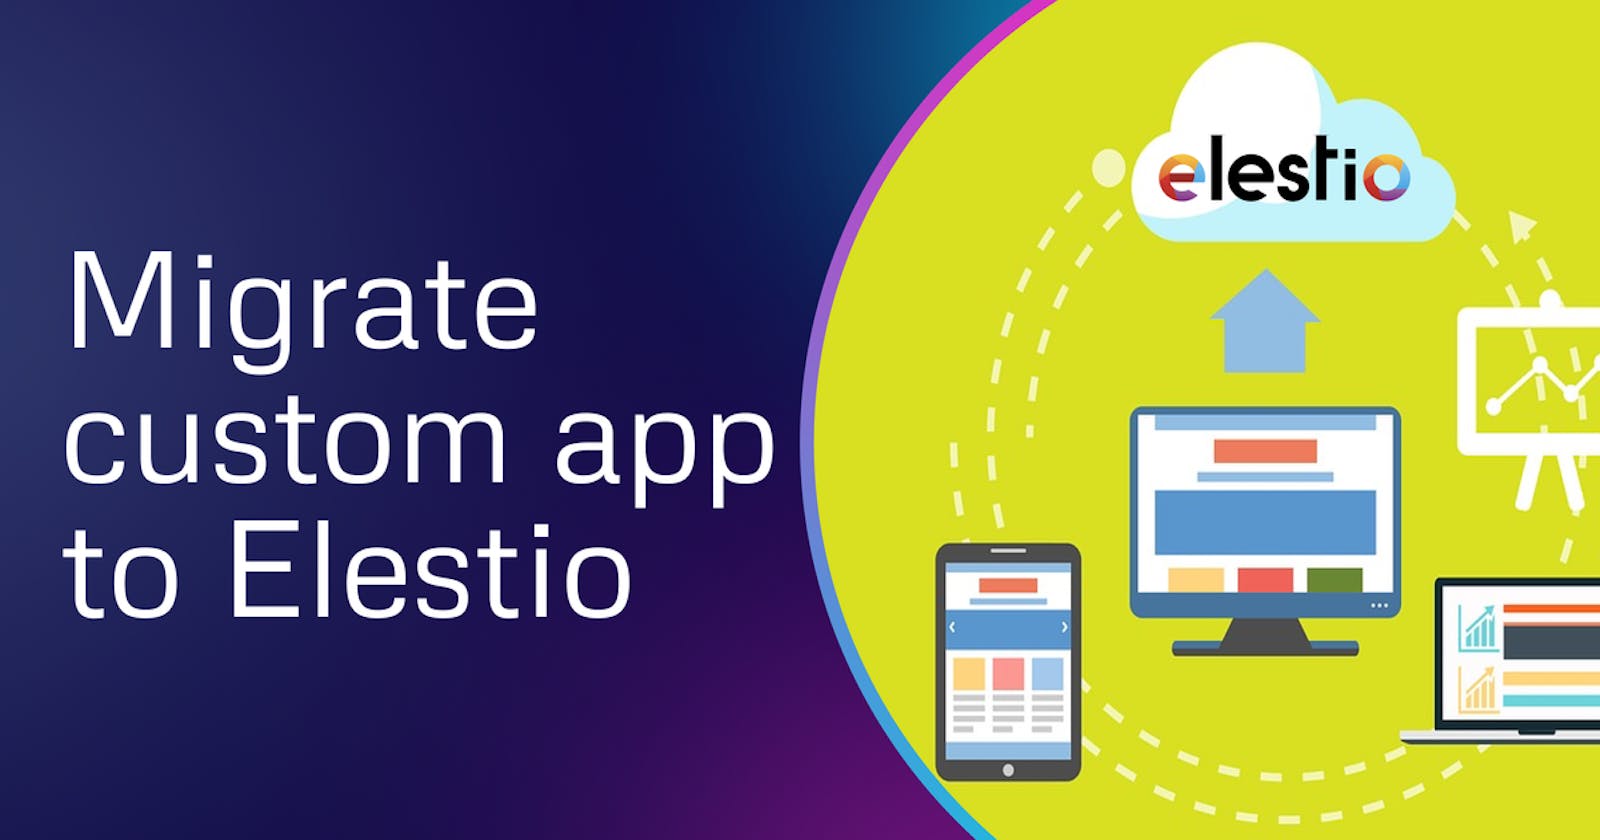 Migrate your customized application to Elestio